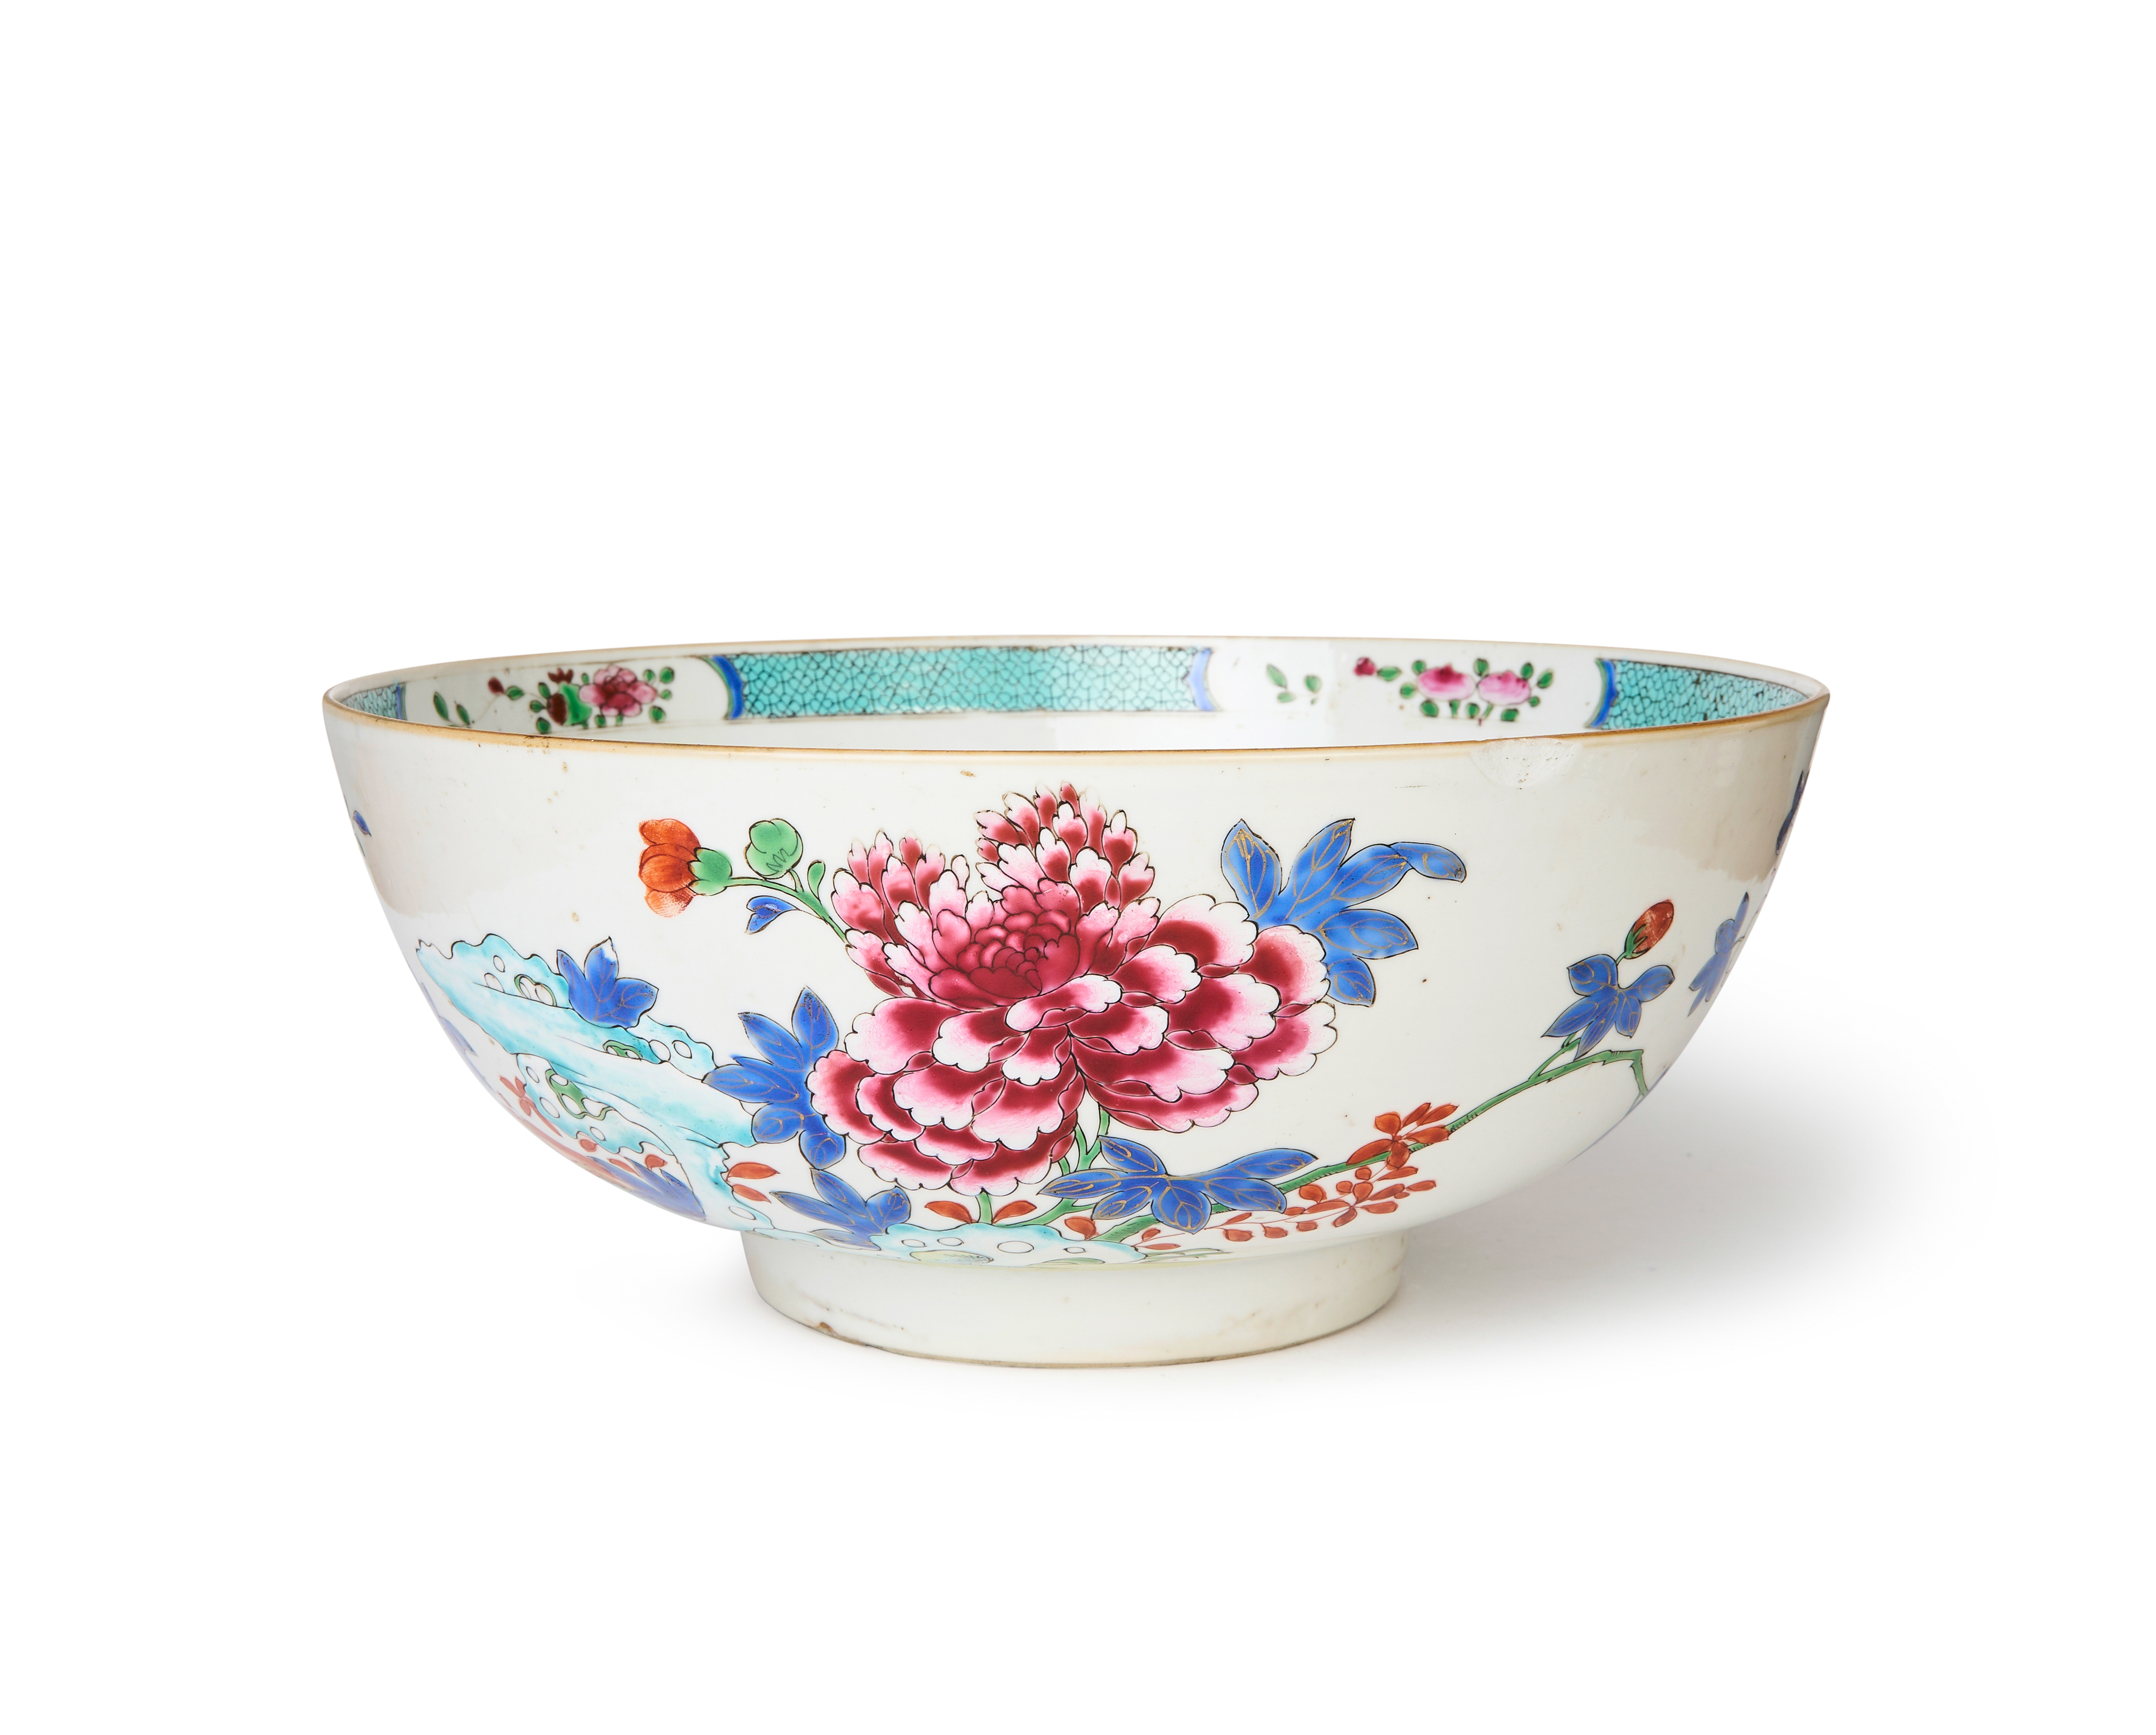 A CHINESE FAMILLE ROSE PUNCH BOWL, QIANLONG PERIOD (1736-1795)